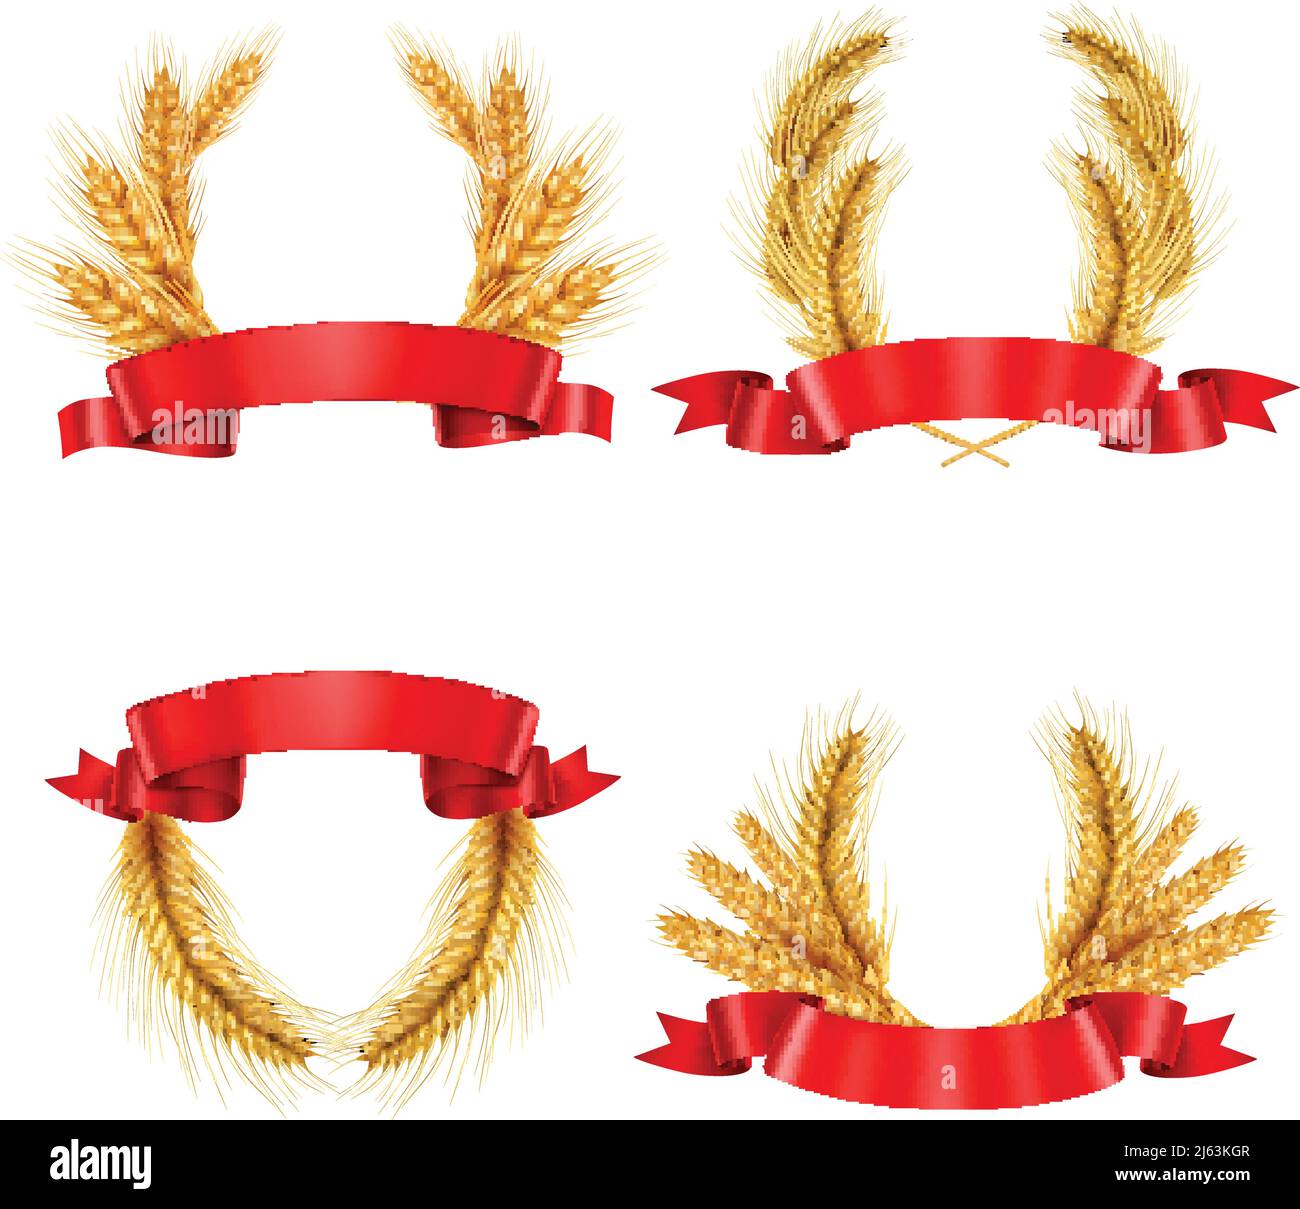 Set of realistic spikelet wreaths from wheat and barley with red glossy ribbons isolated vector illustration Stock Vector